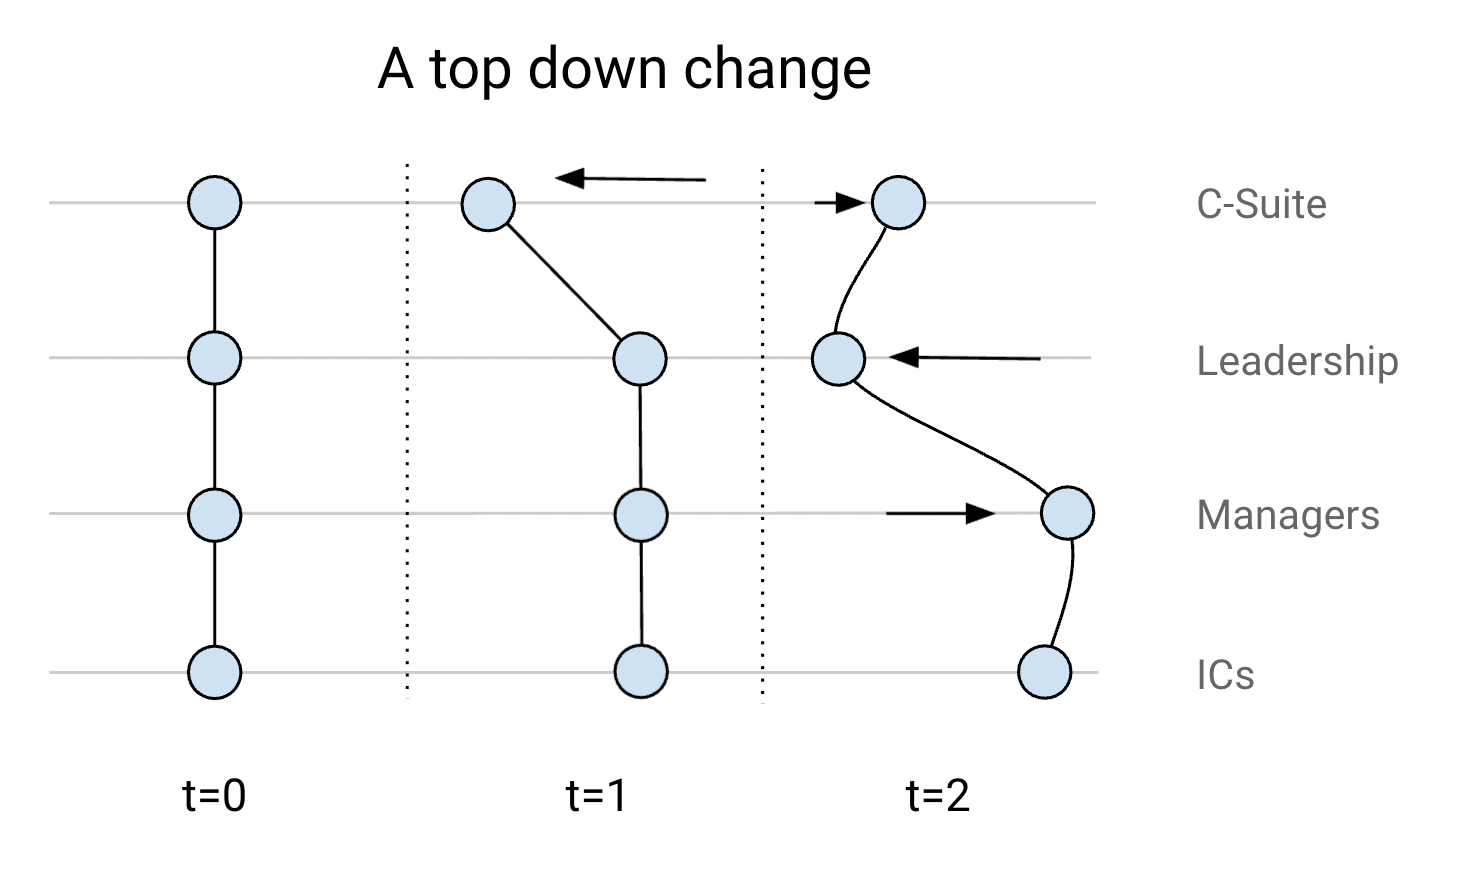 In T=1, the C-Suite moves to the left. As the movement propagates through the organization, teams get the information at different times and react, creating the 'string effect'. The C-Suite may backpedal after telling leadership, ICs may hear through back channels and busy managers may be left in the dark.